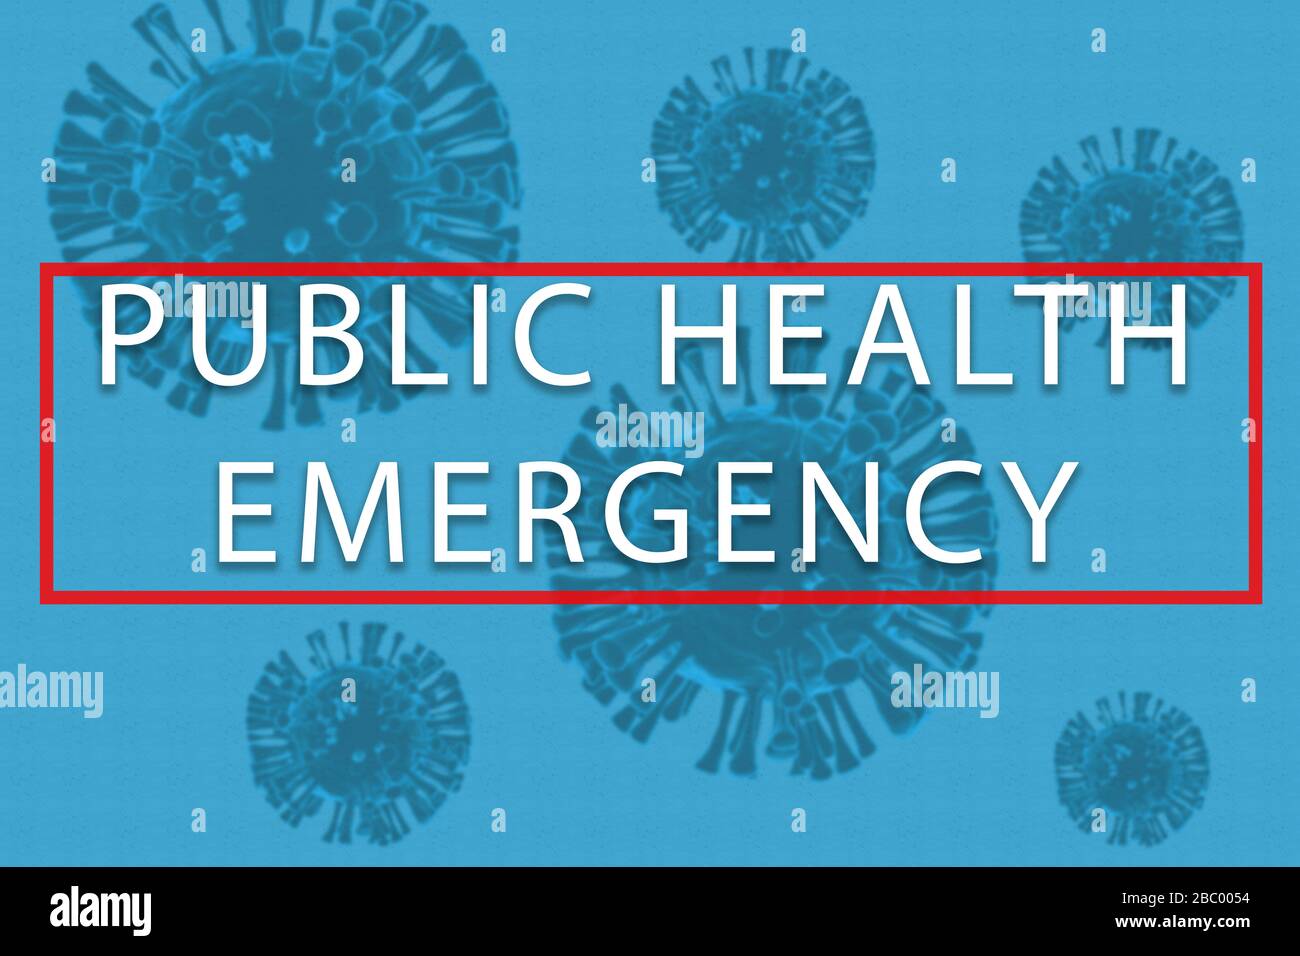 Concept of public health emergency due to coronavirus or covid-19 pandemic or outbreak. Stock Photo